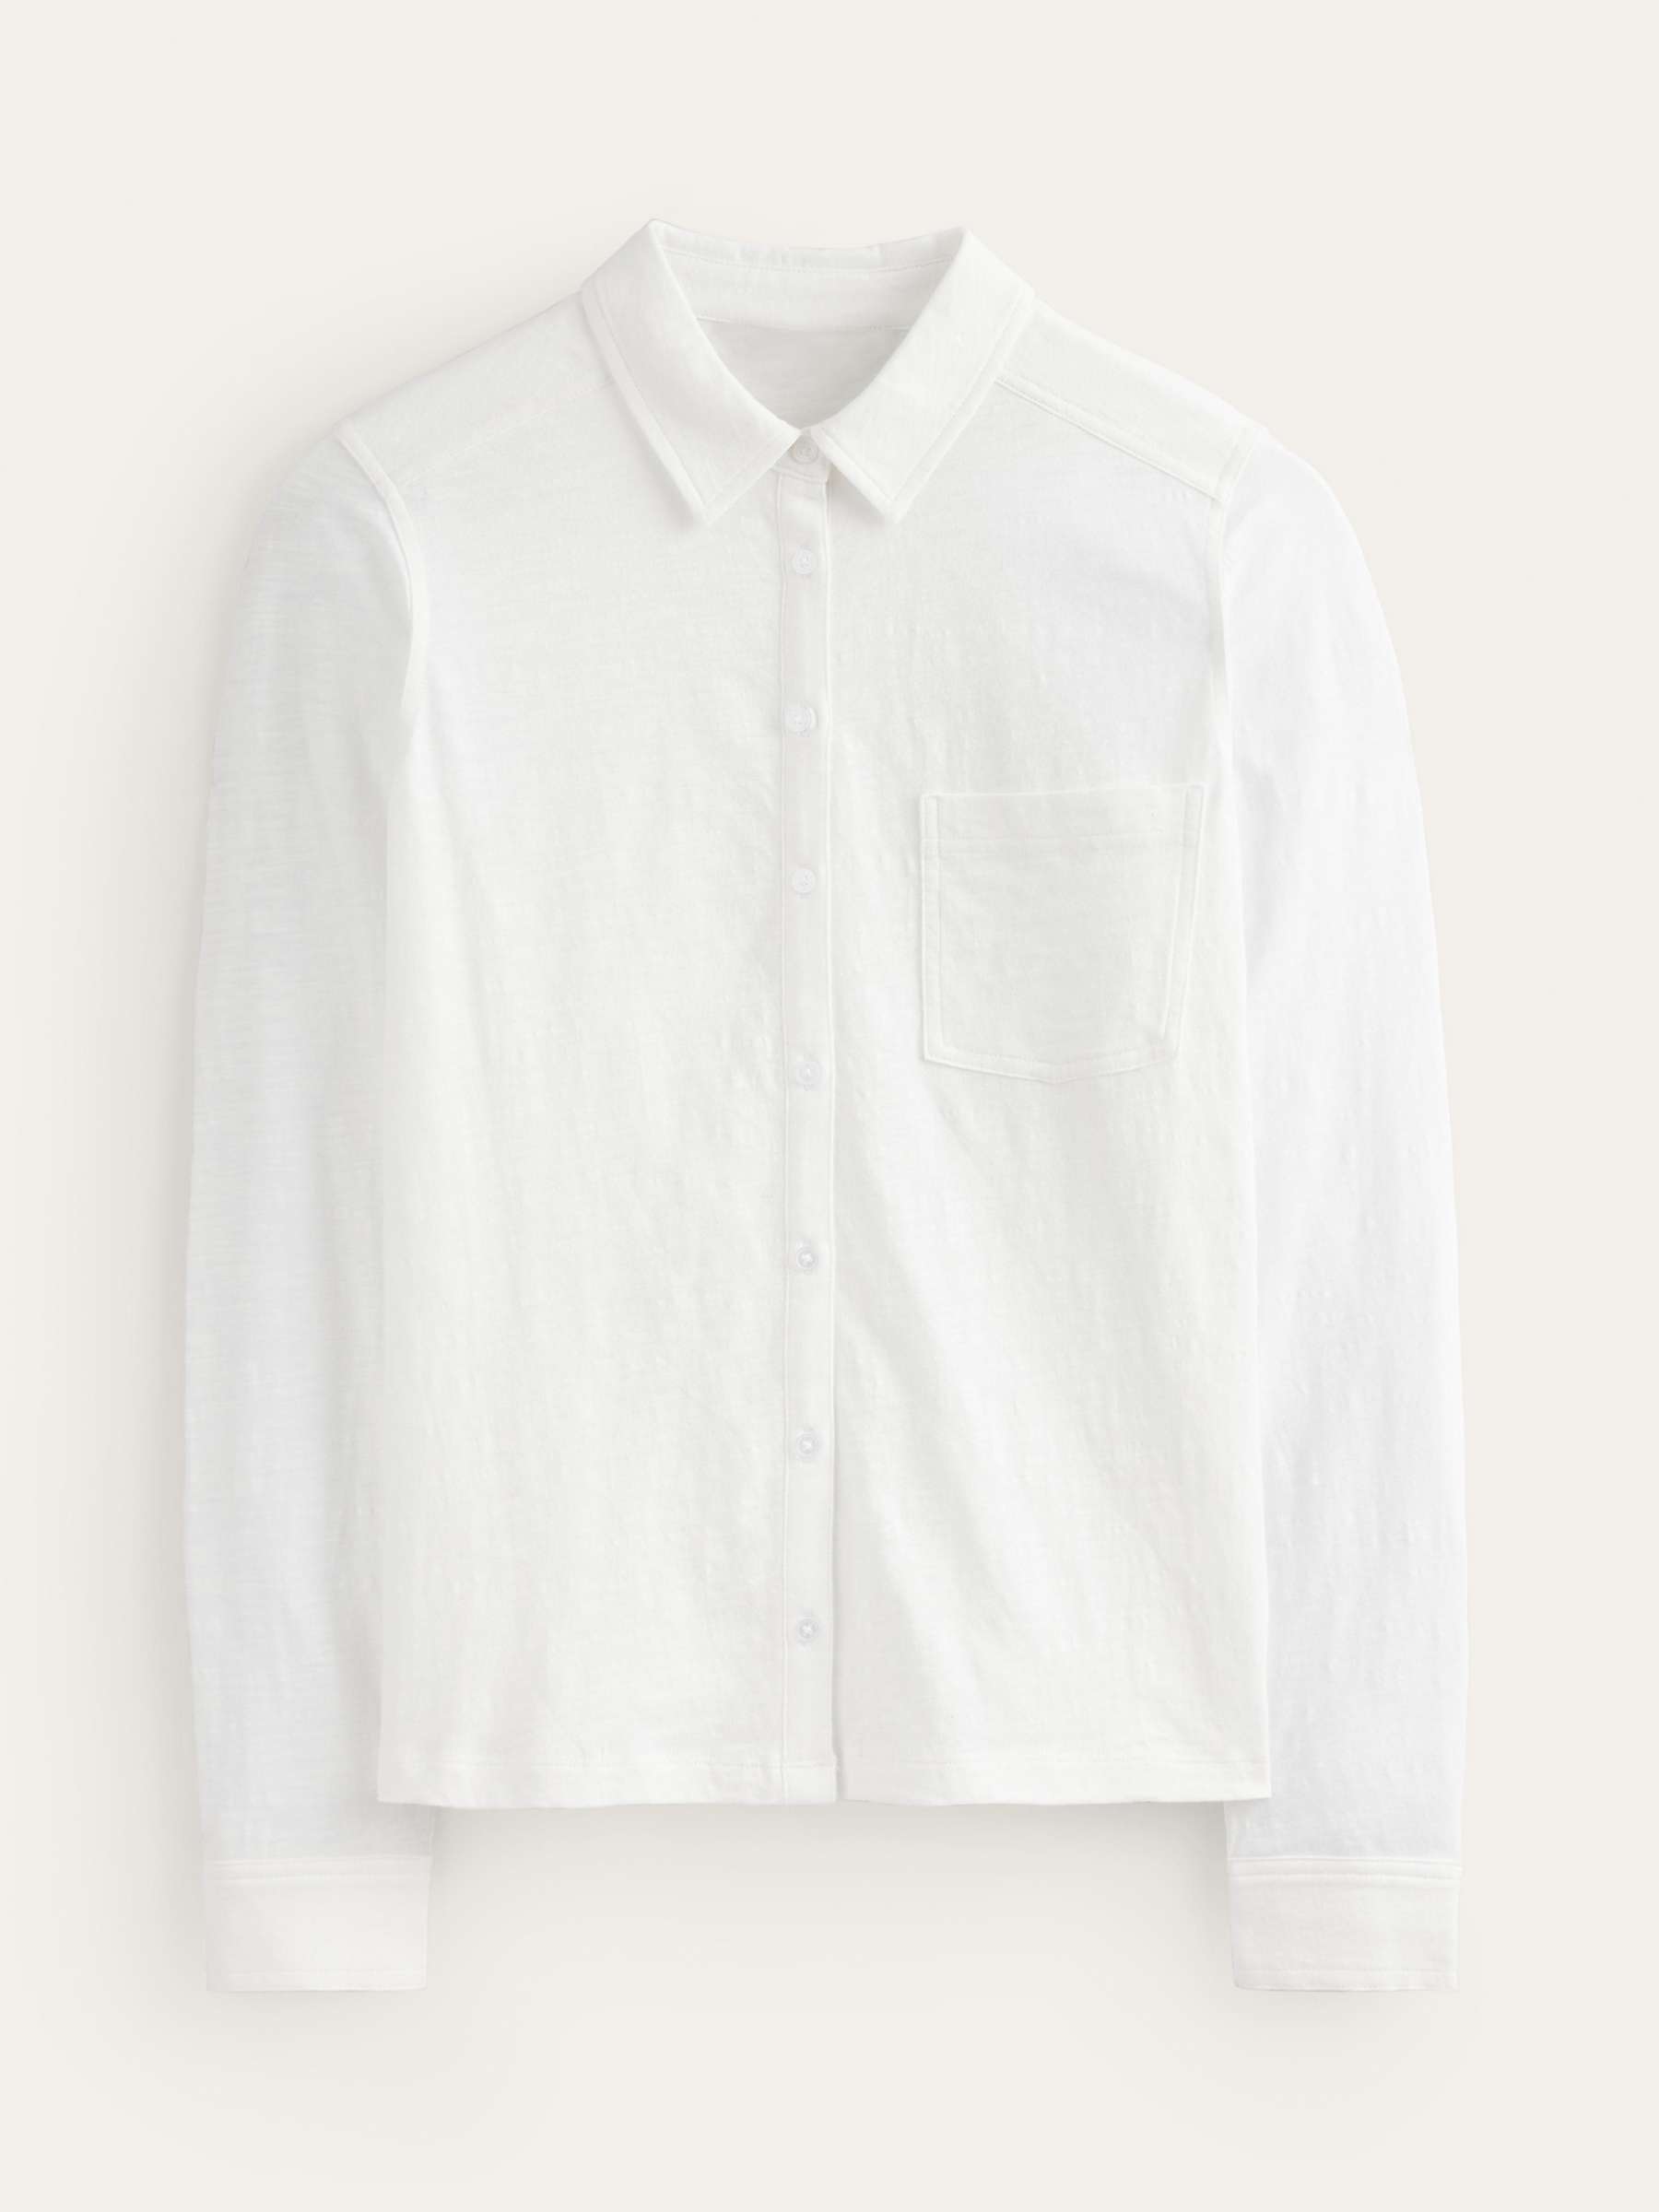 Buy Boden Amelia Cotton Jersey Shirt, White Online at johnlewis.com